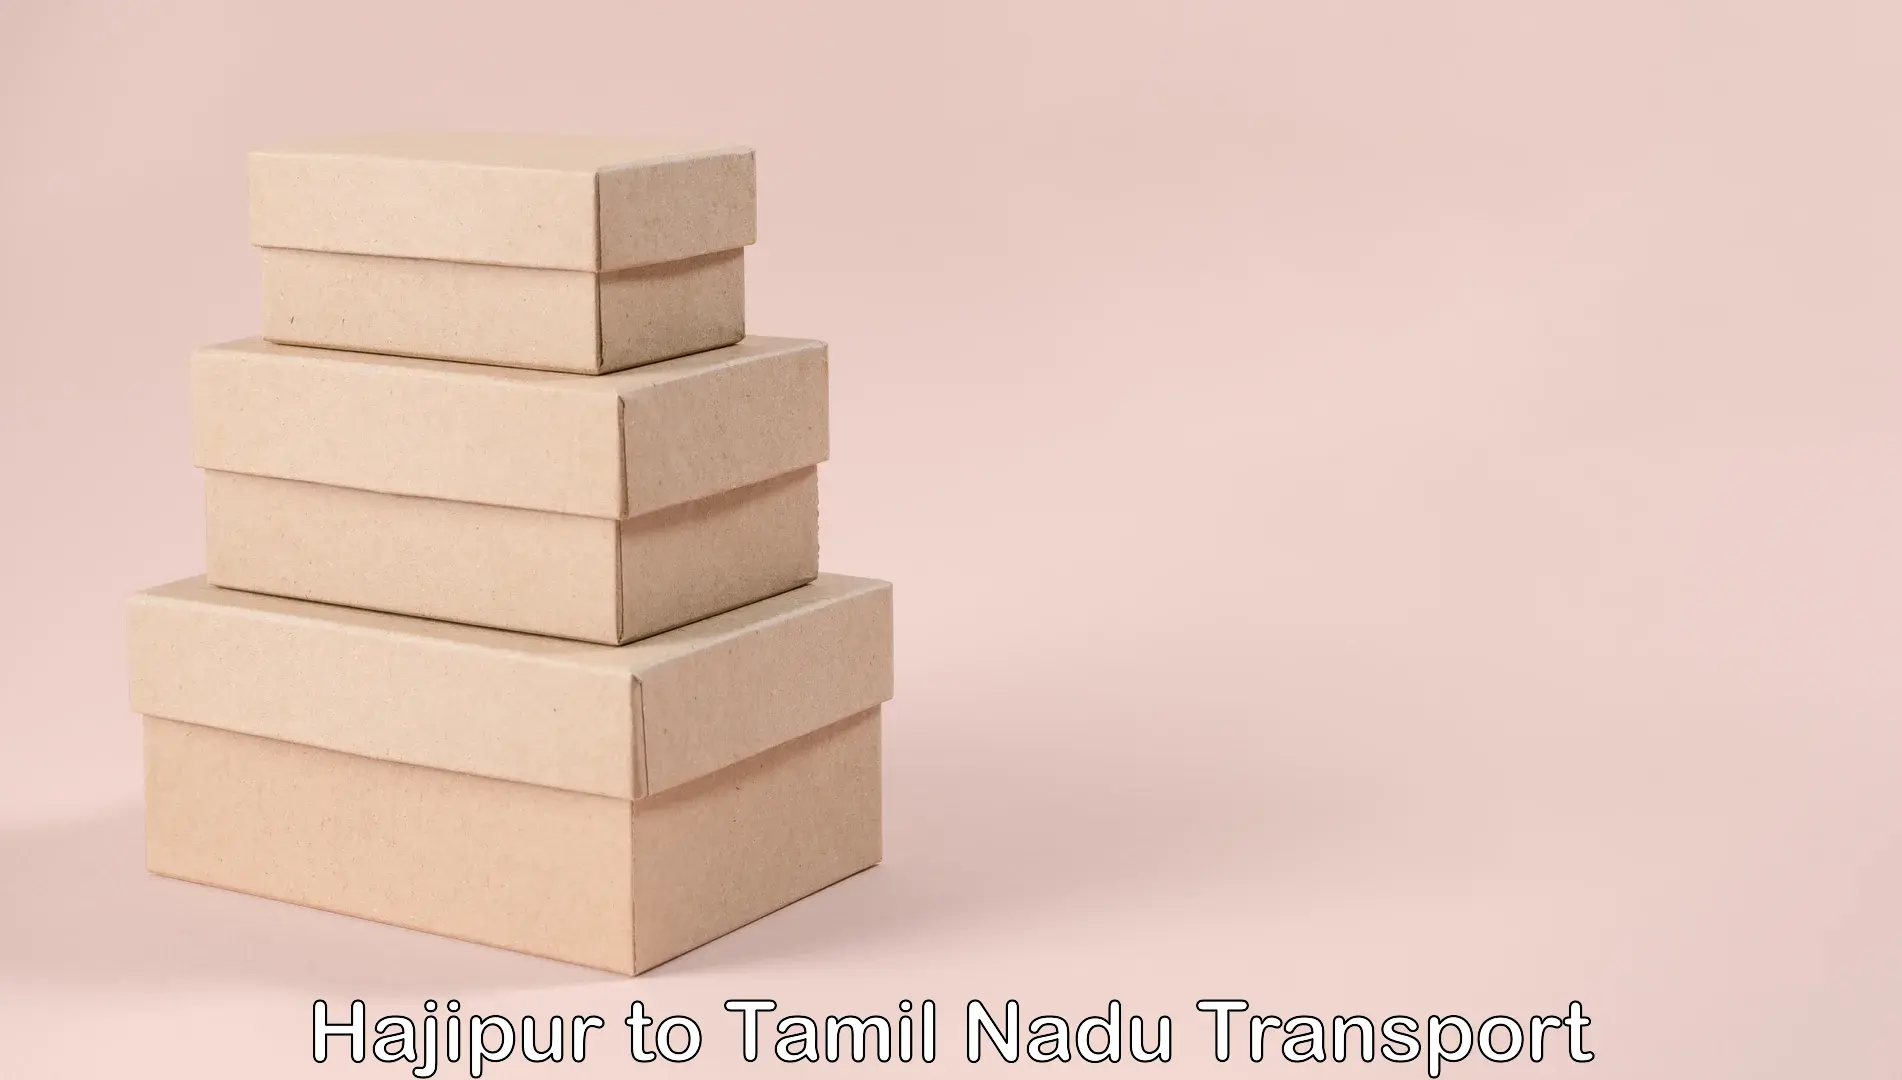 Furniture transport service Hajipur to Vellore Institute of Technology